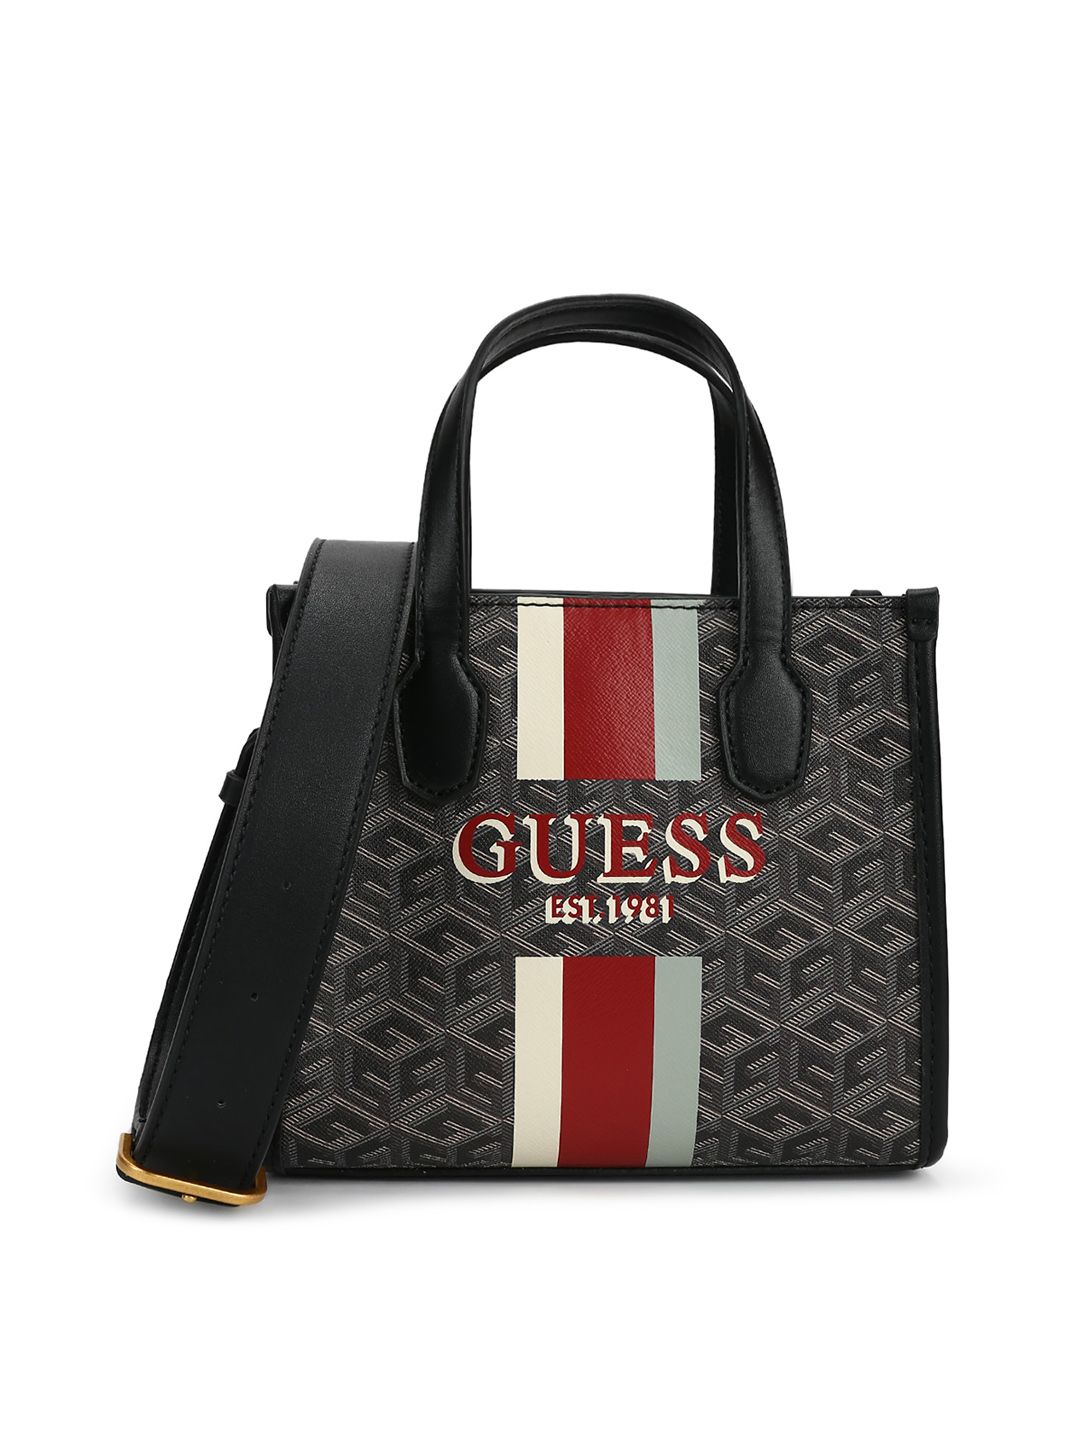 Guess MONIQUE Red Printed Tote Bags